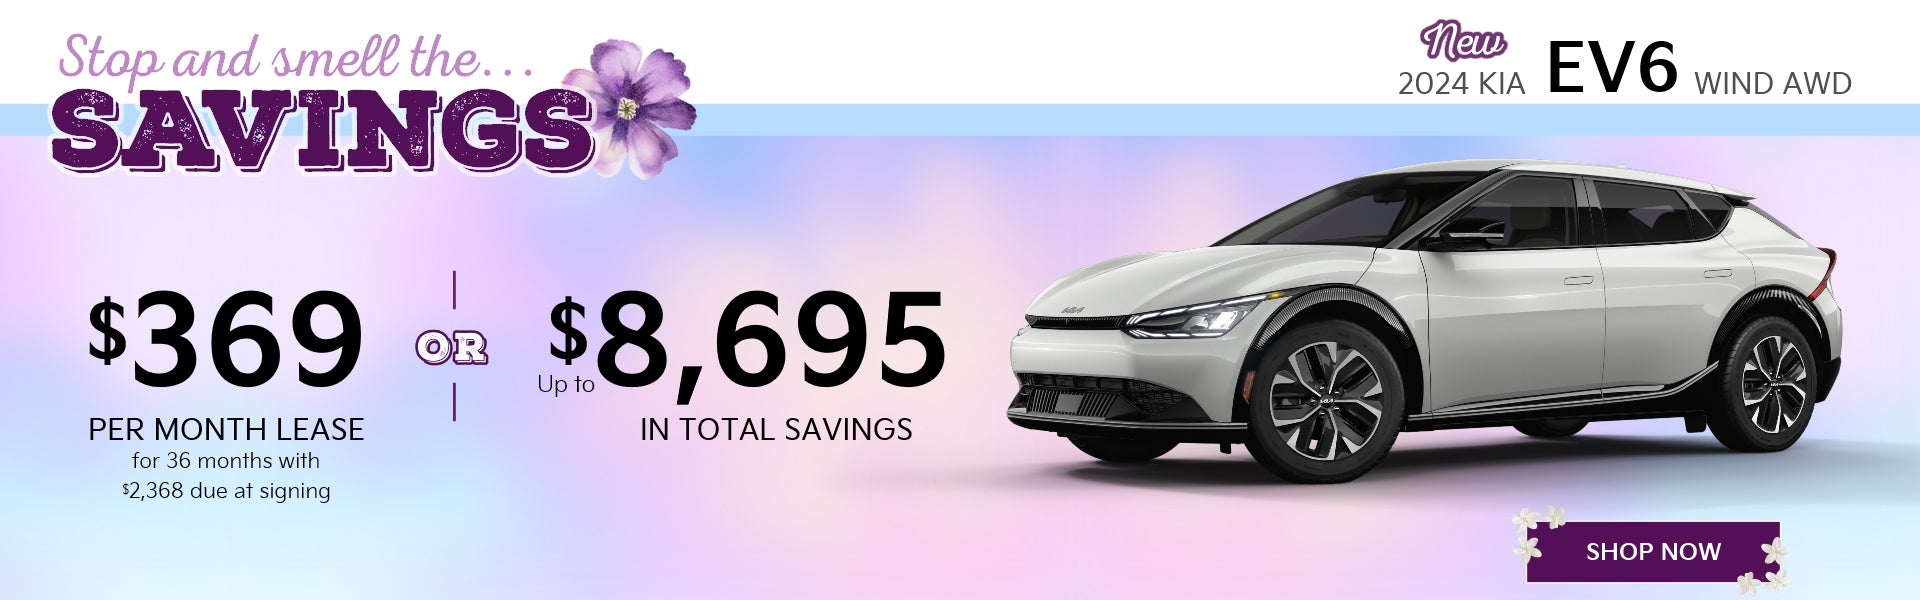 Stop and smell the savings on a new 2024 Kia EV6 Wind AWD!